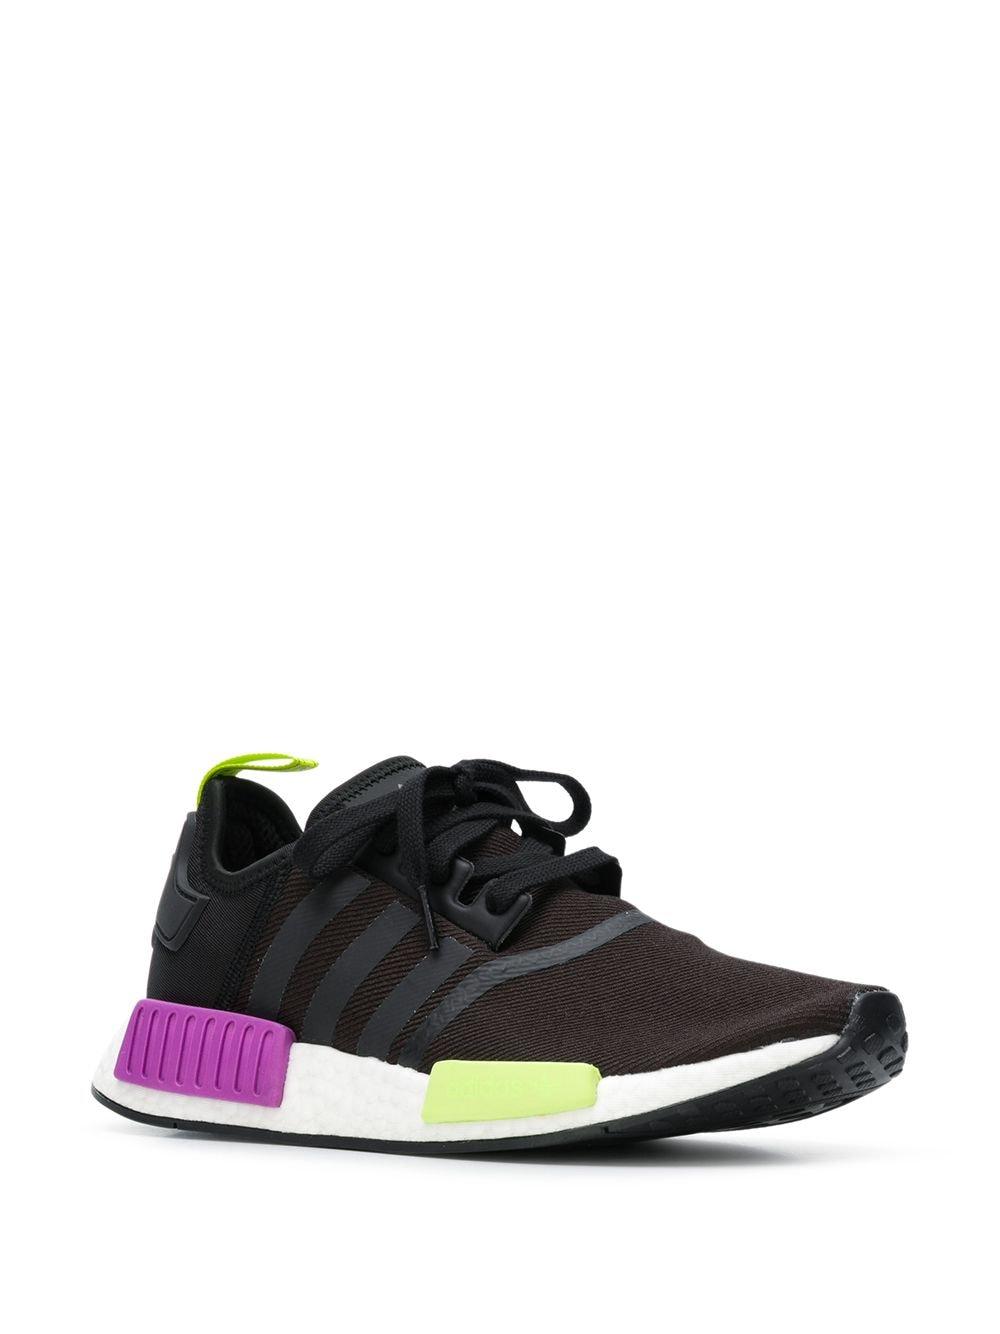 adidas NMD R1 Gray Solar Red F35882 Release Date 5